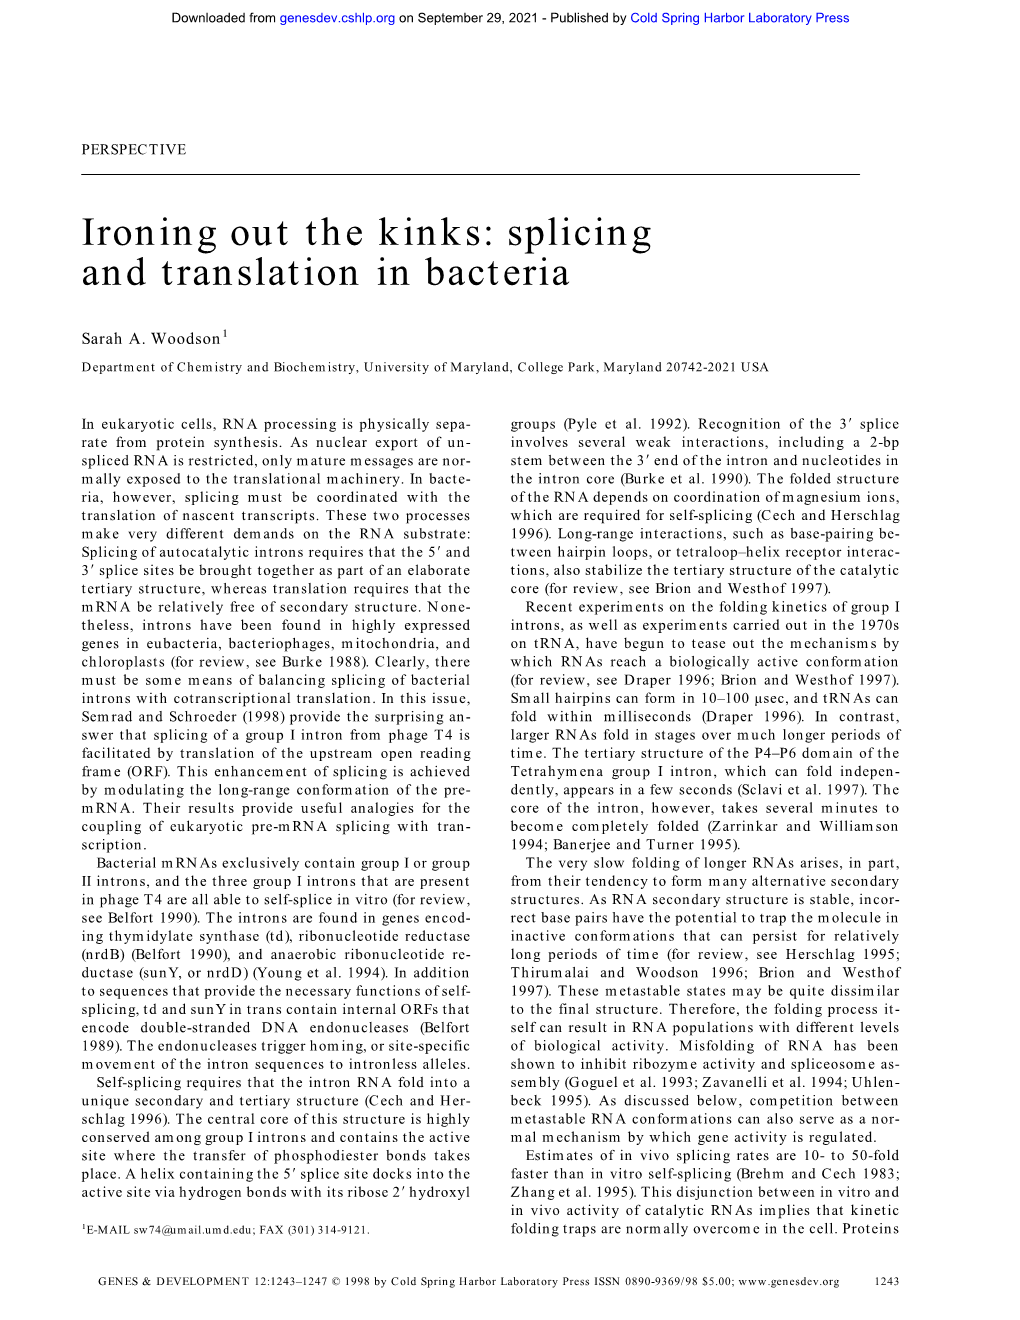 Splicing and Translation in Bacteria